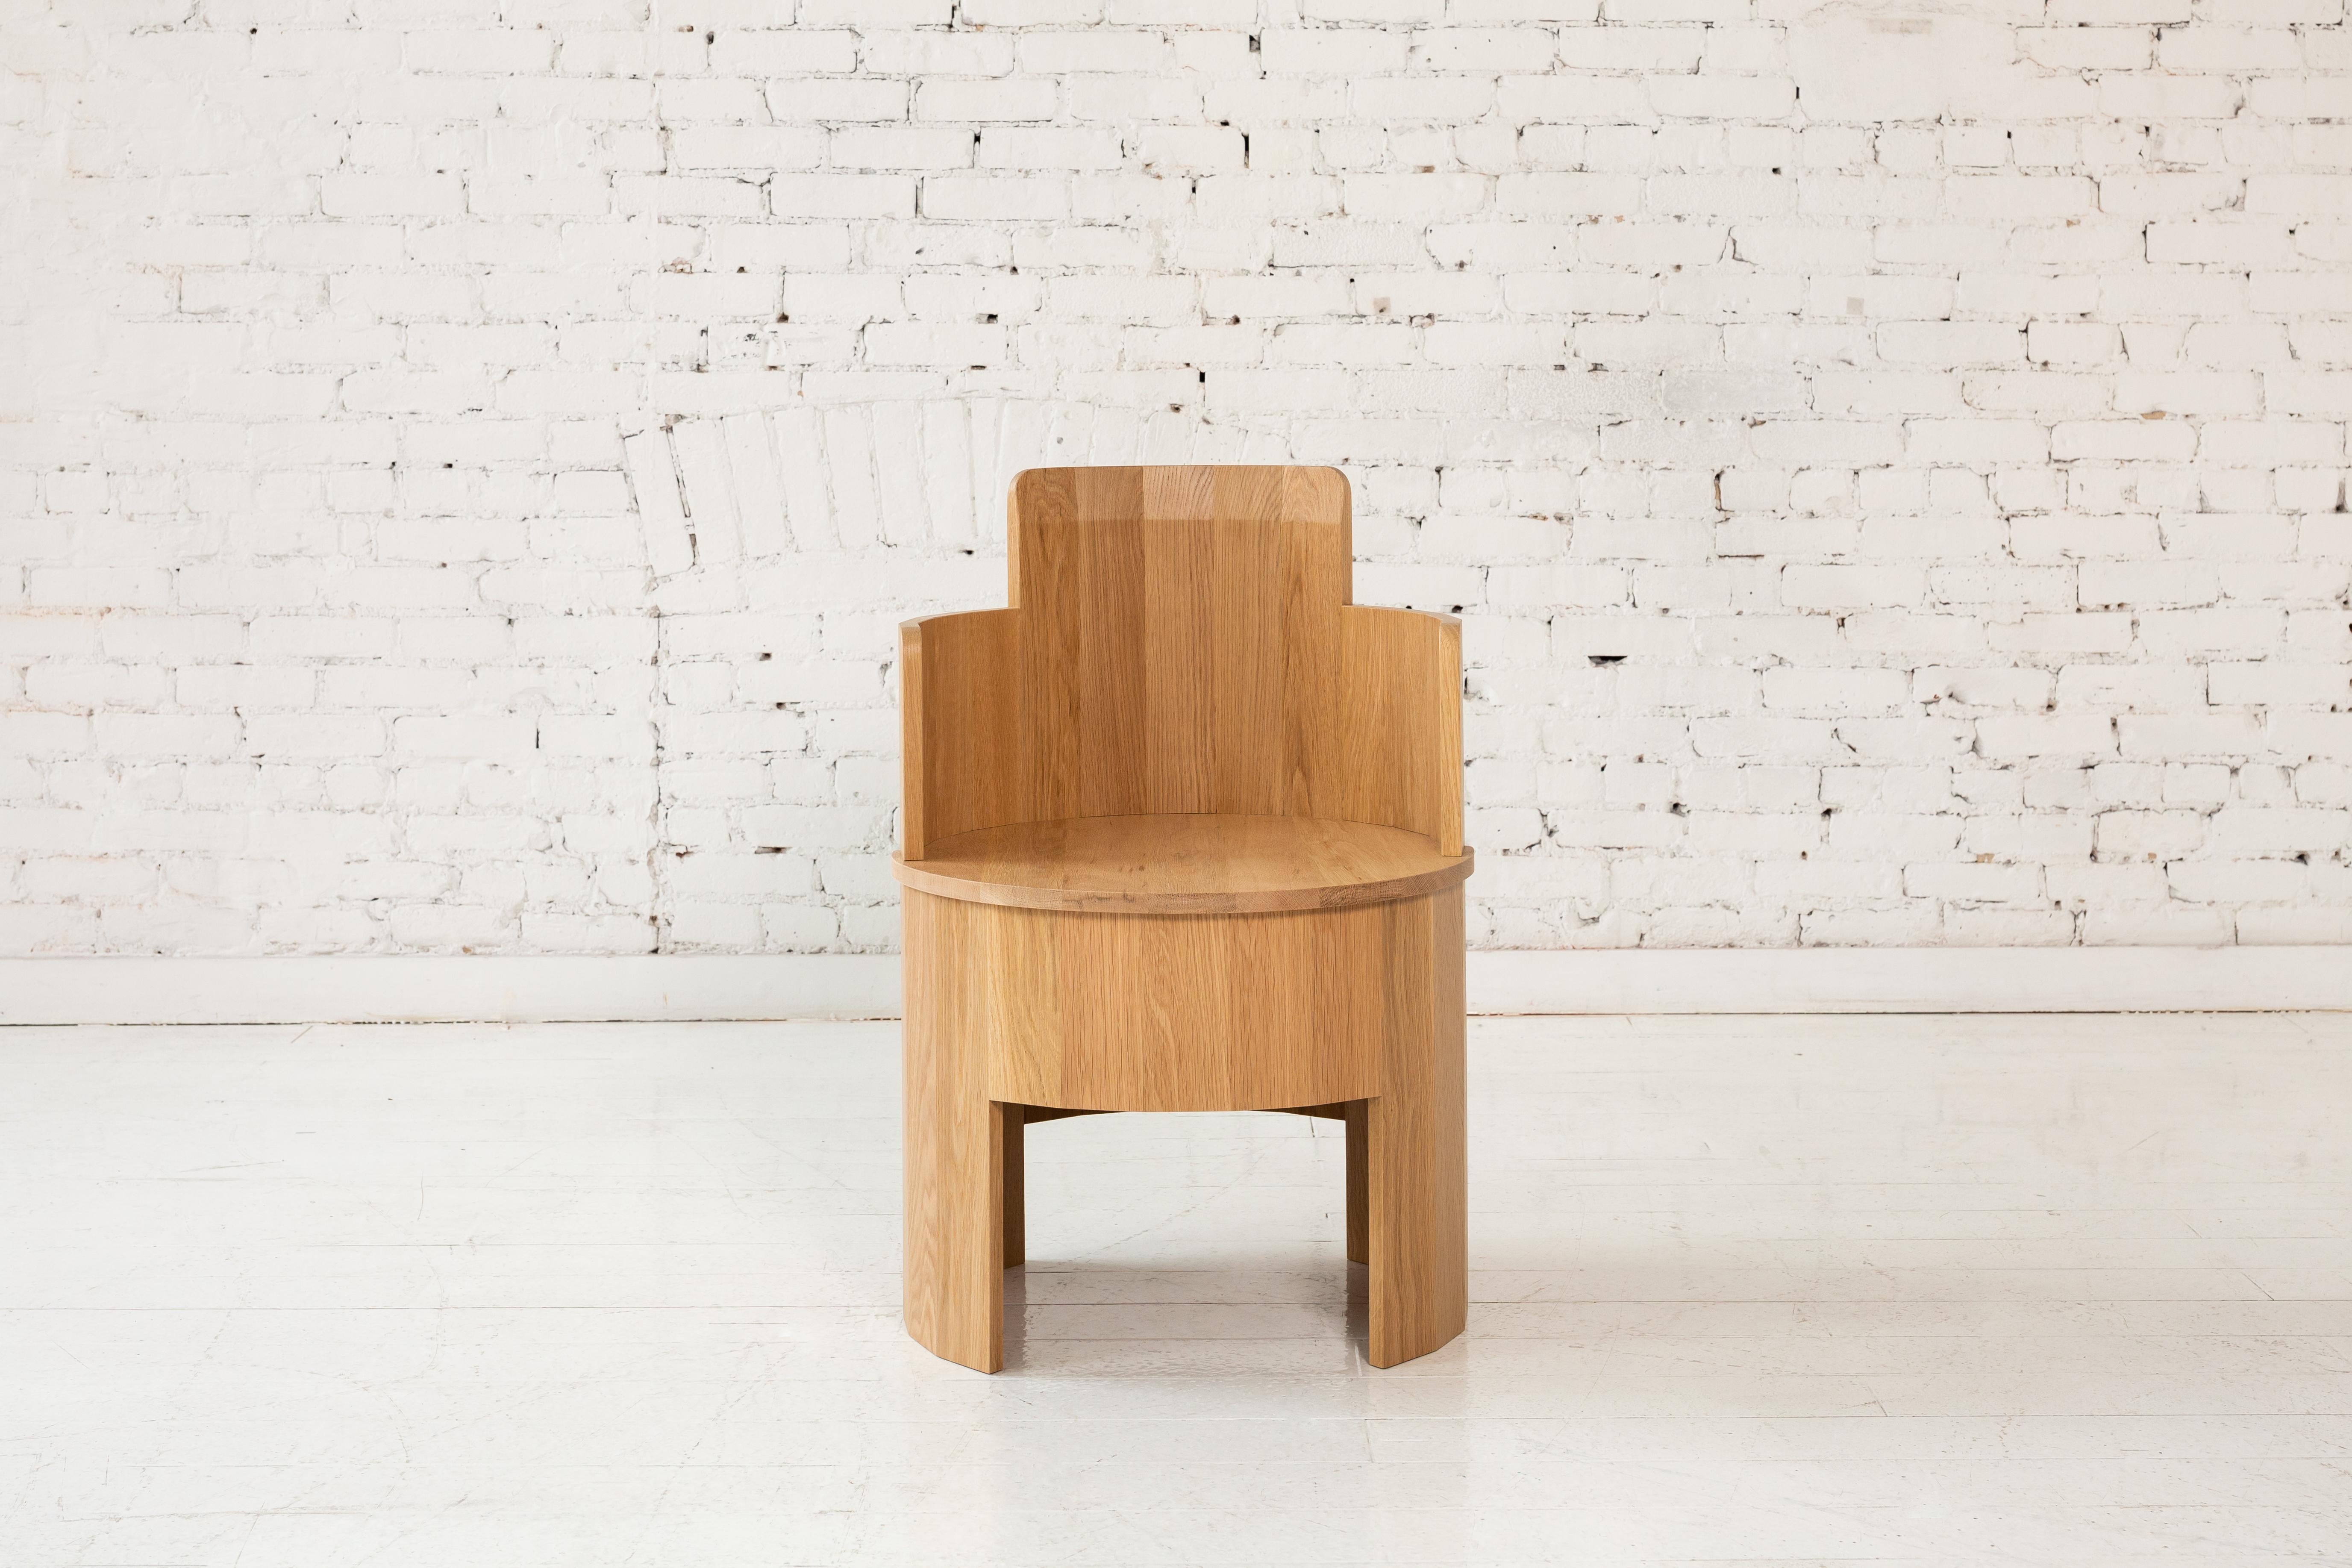 This side chair is a part of the new cooperage dining collection. Each piece features large faceted round elements that with its namesake reference the traditional cooper's trade of making barrels.

The occasional chair table is shown in solid